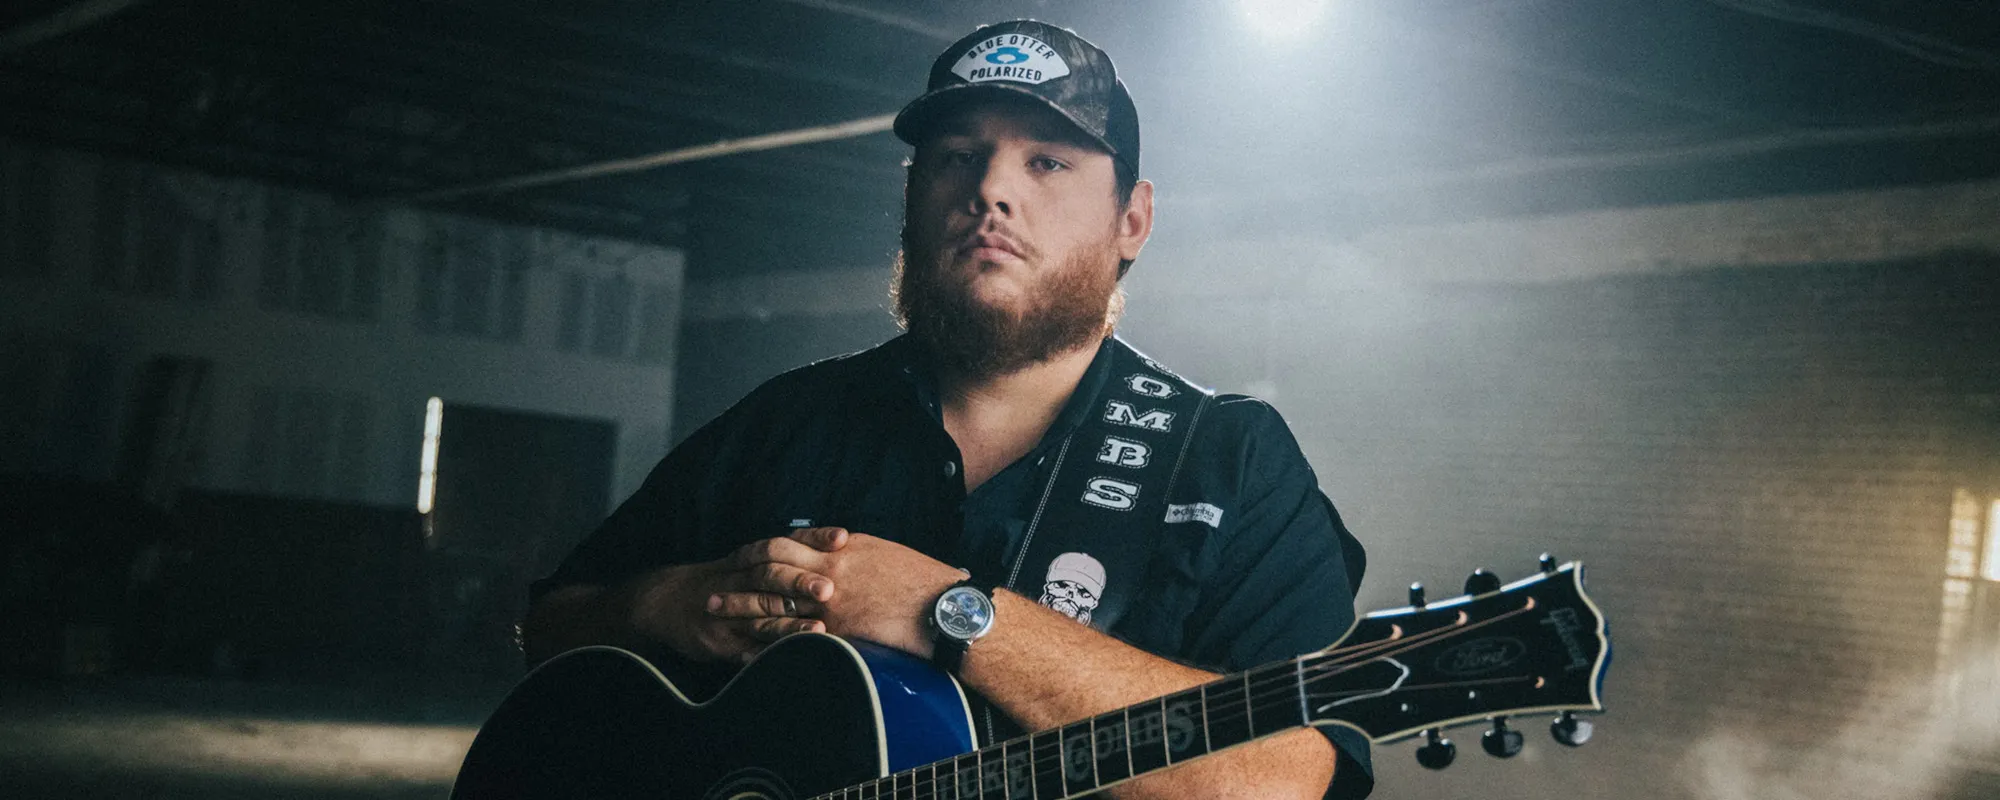 Luke Combs Releases Latest Single, “The Kind of Love We Make”